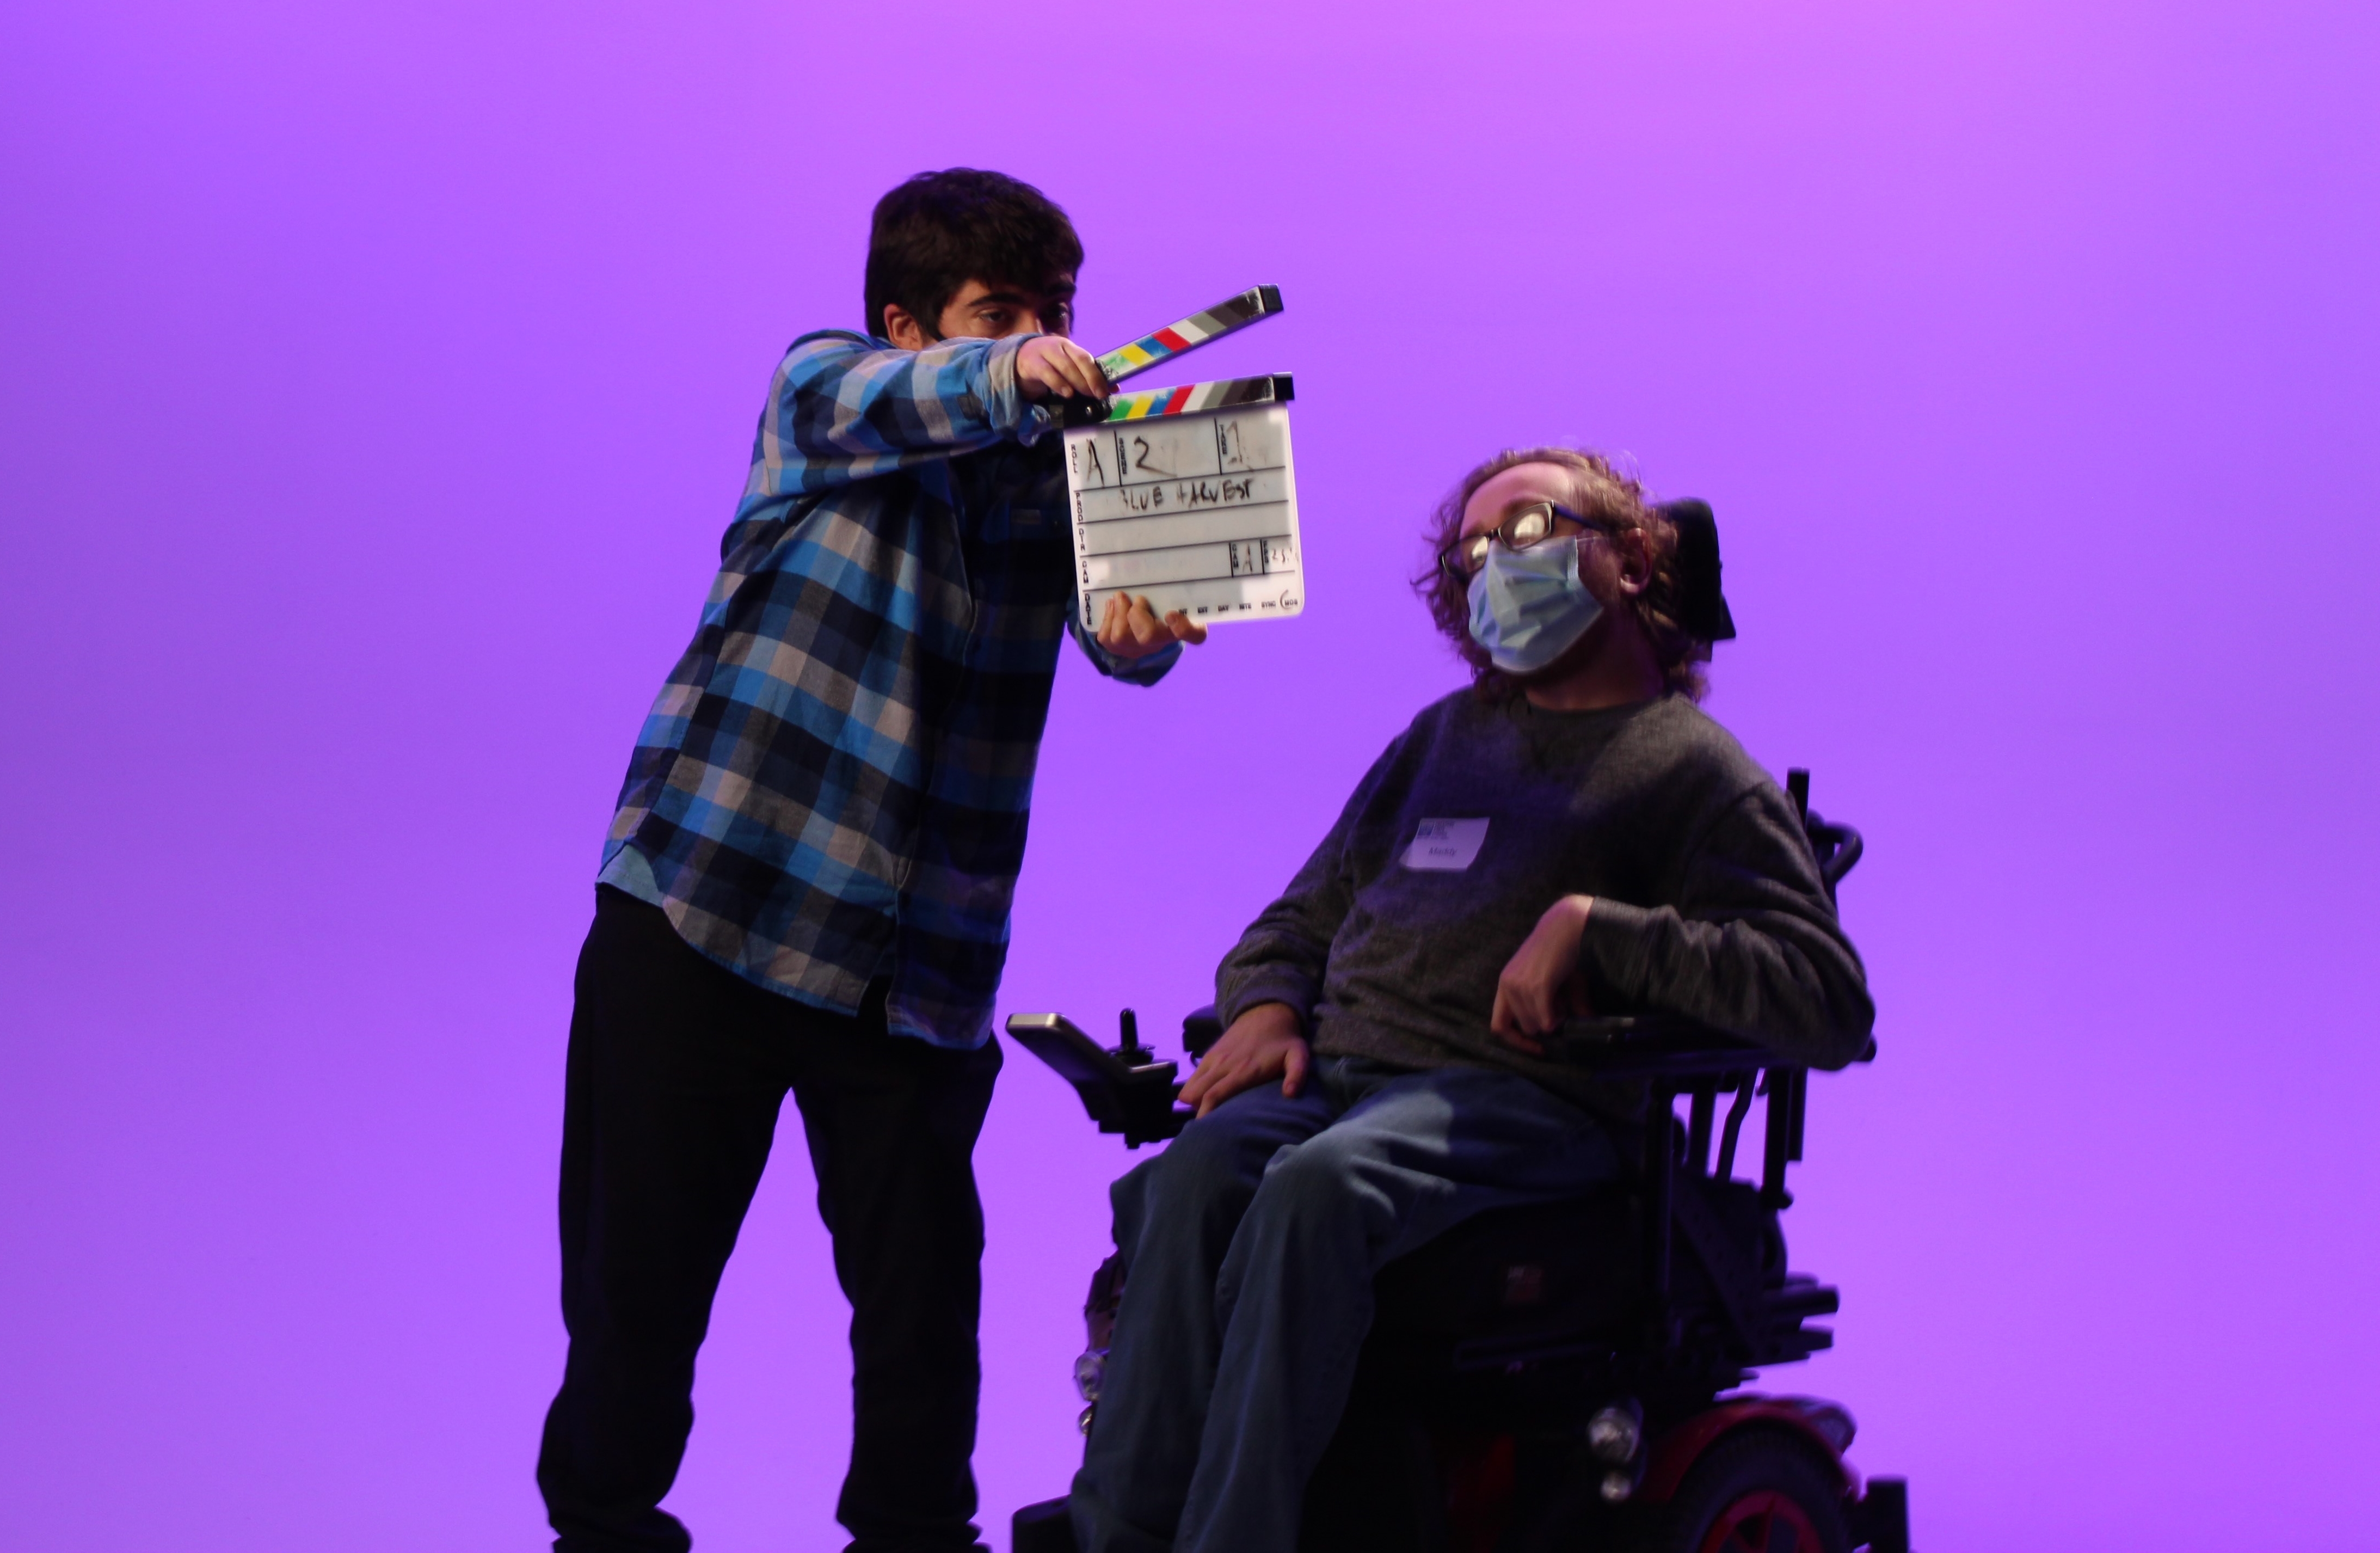 Photo of a man snapping a clapperboard in front of man in to indicate filming has begun.